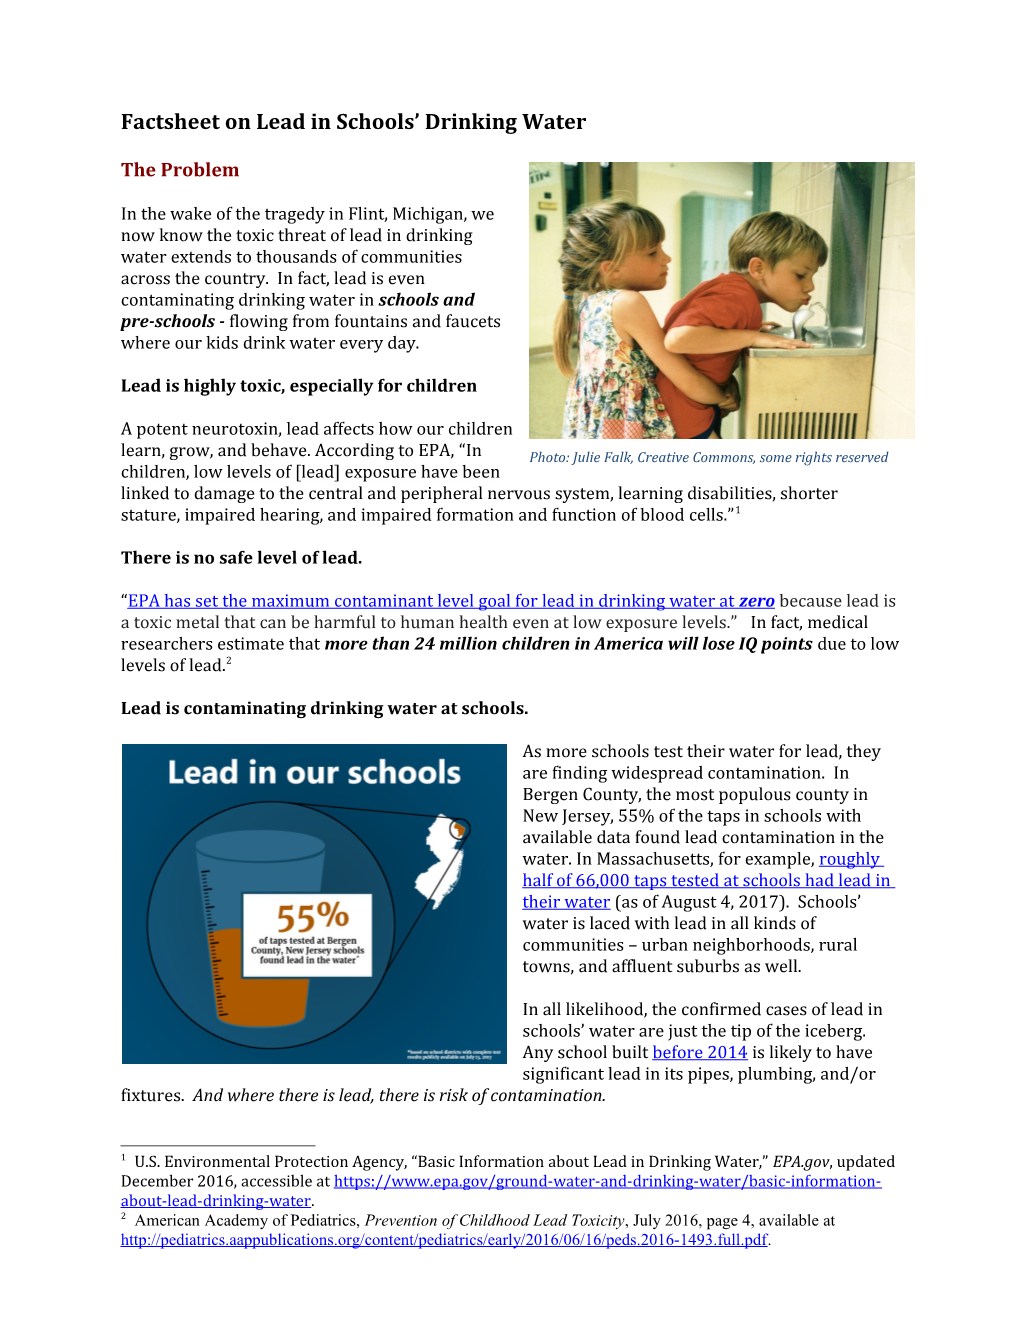 Ø Learn the Facts About Lead in Schools Drinking Water with Our Factsheet